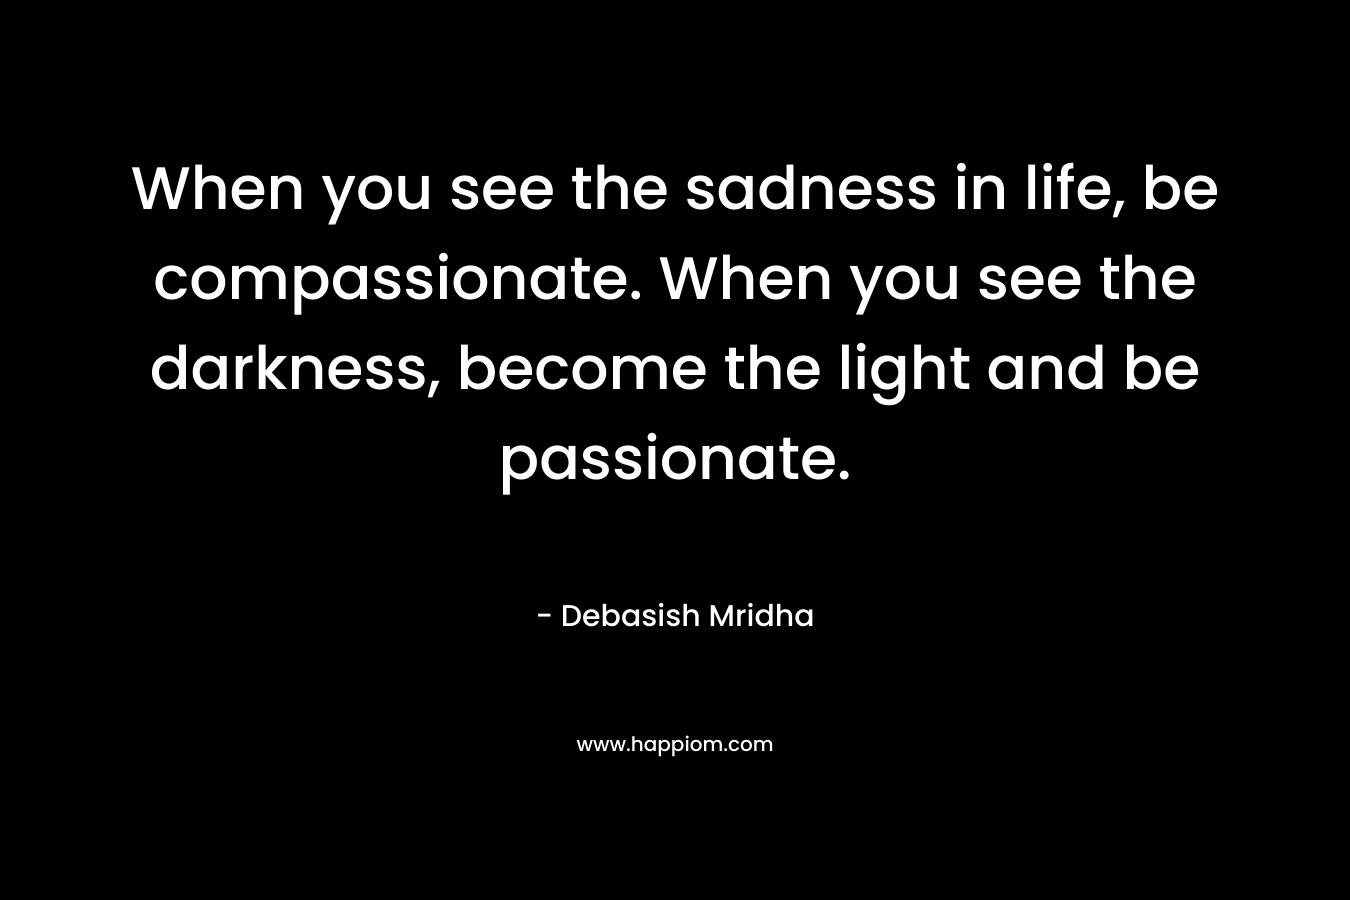 When you see the sadness in life, be compassionate. When you see the darkness, become the light and be passionate.